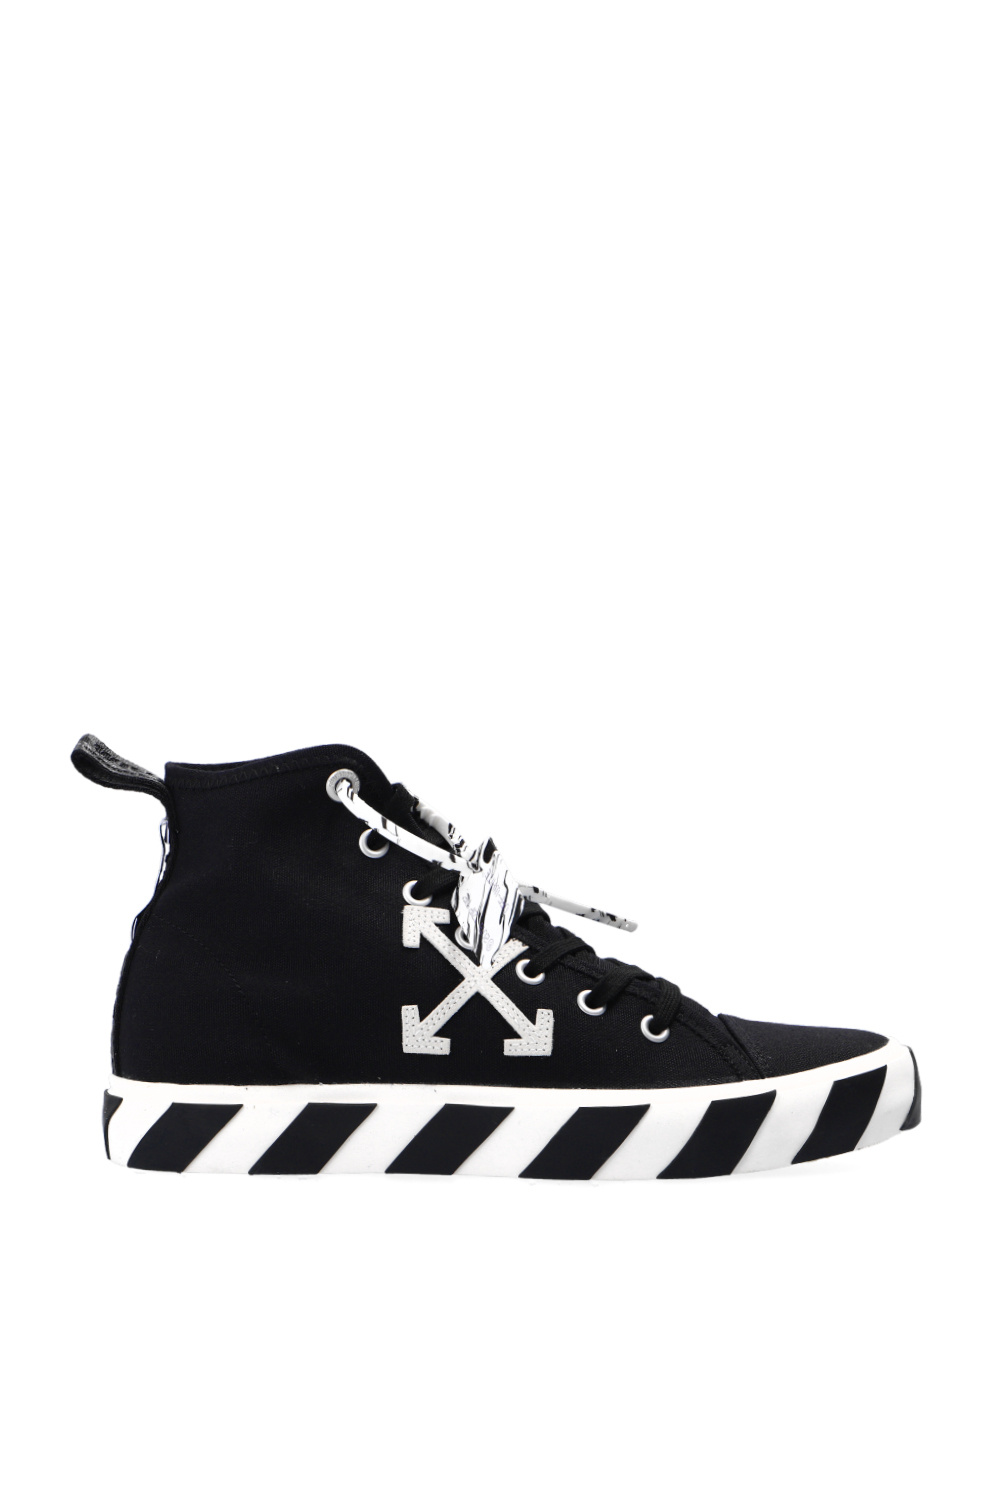 Off-White Mid Top Vulcanized Leather White White, High-Top Sneaker